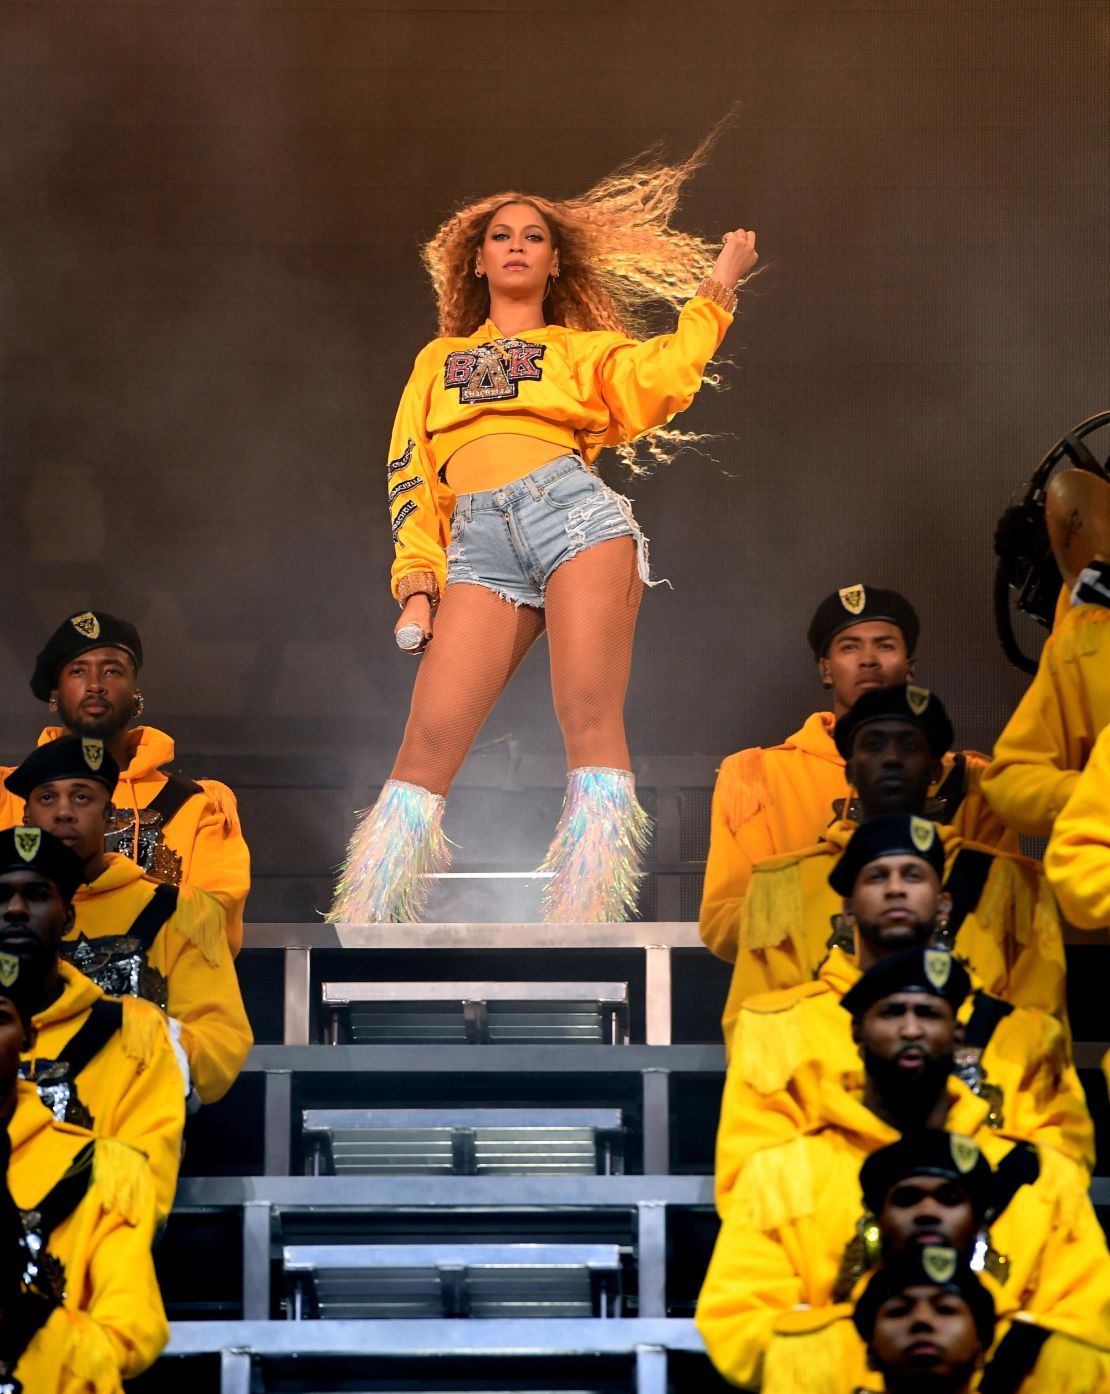 According to Weinstein, megastar Beyoncé -- pictured here performing at Coachella music festival -- has an elaborate pre-show ritual. It involves a prayer, a stretch, a chair massage and an hour to herself while listens to her favorite playlist. 